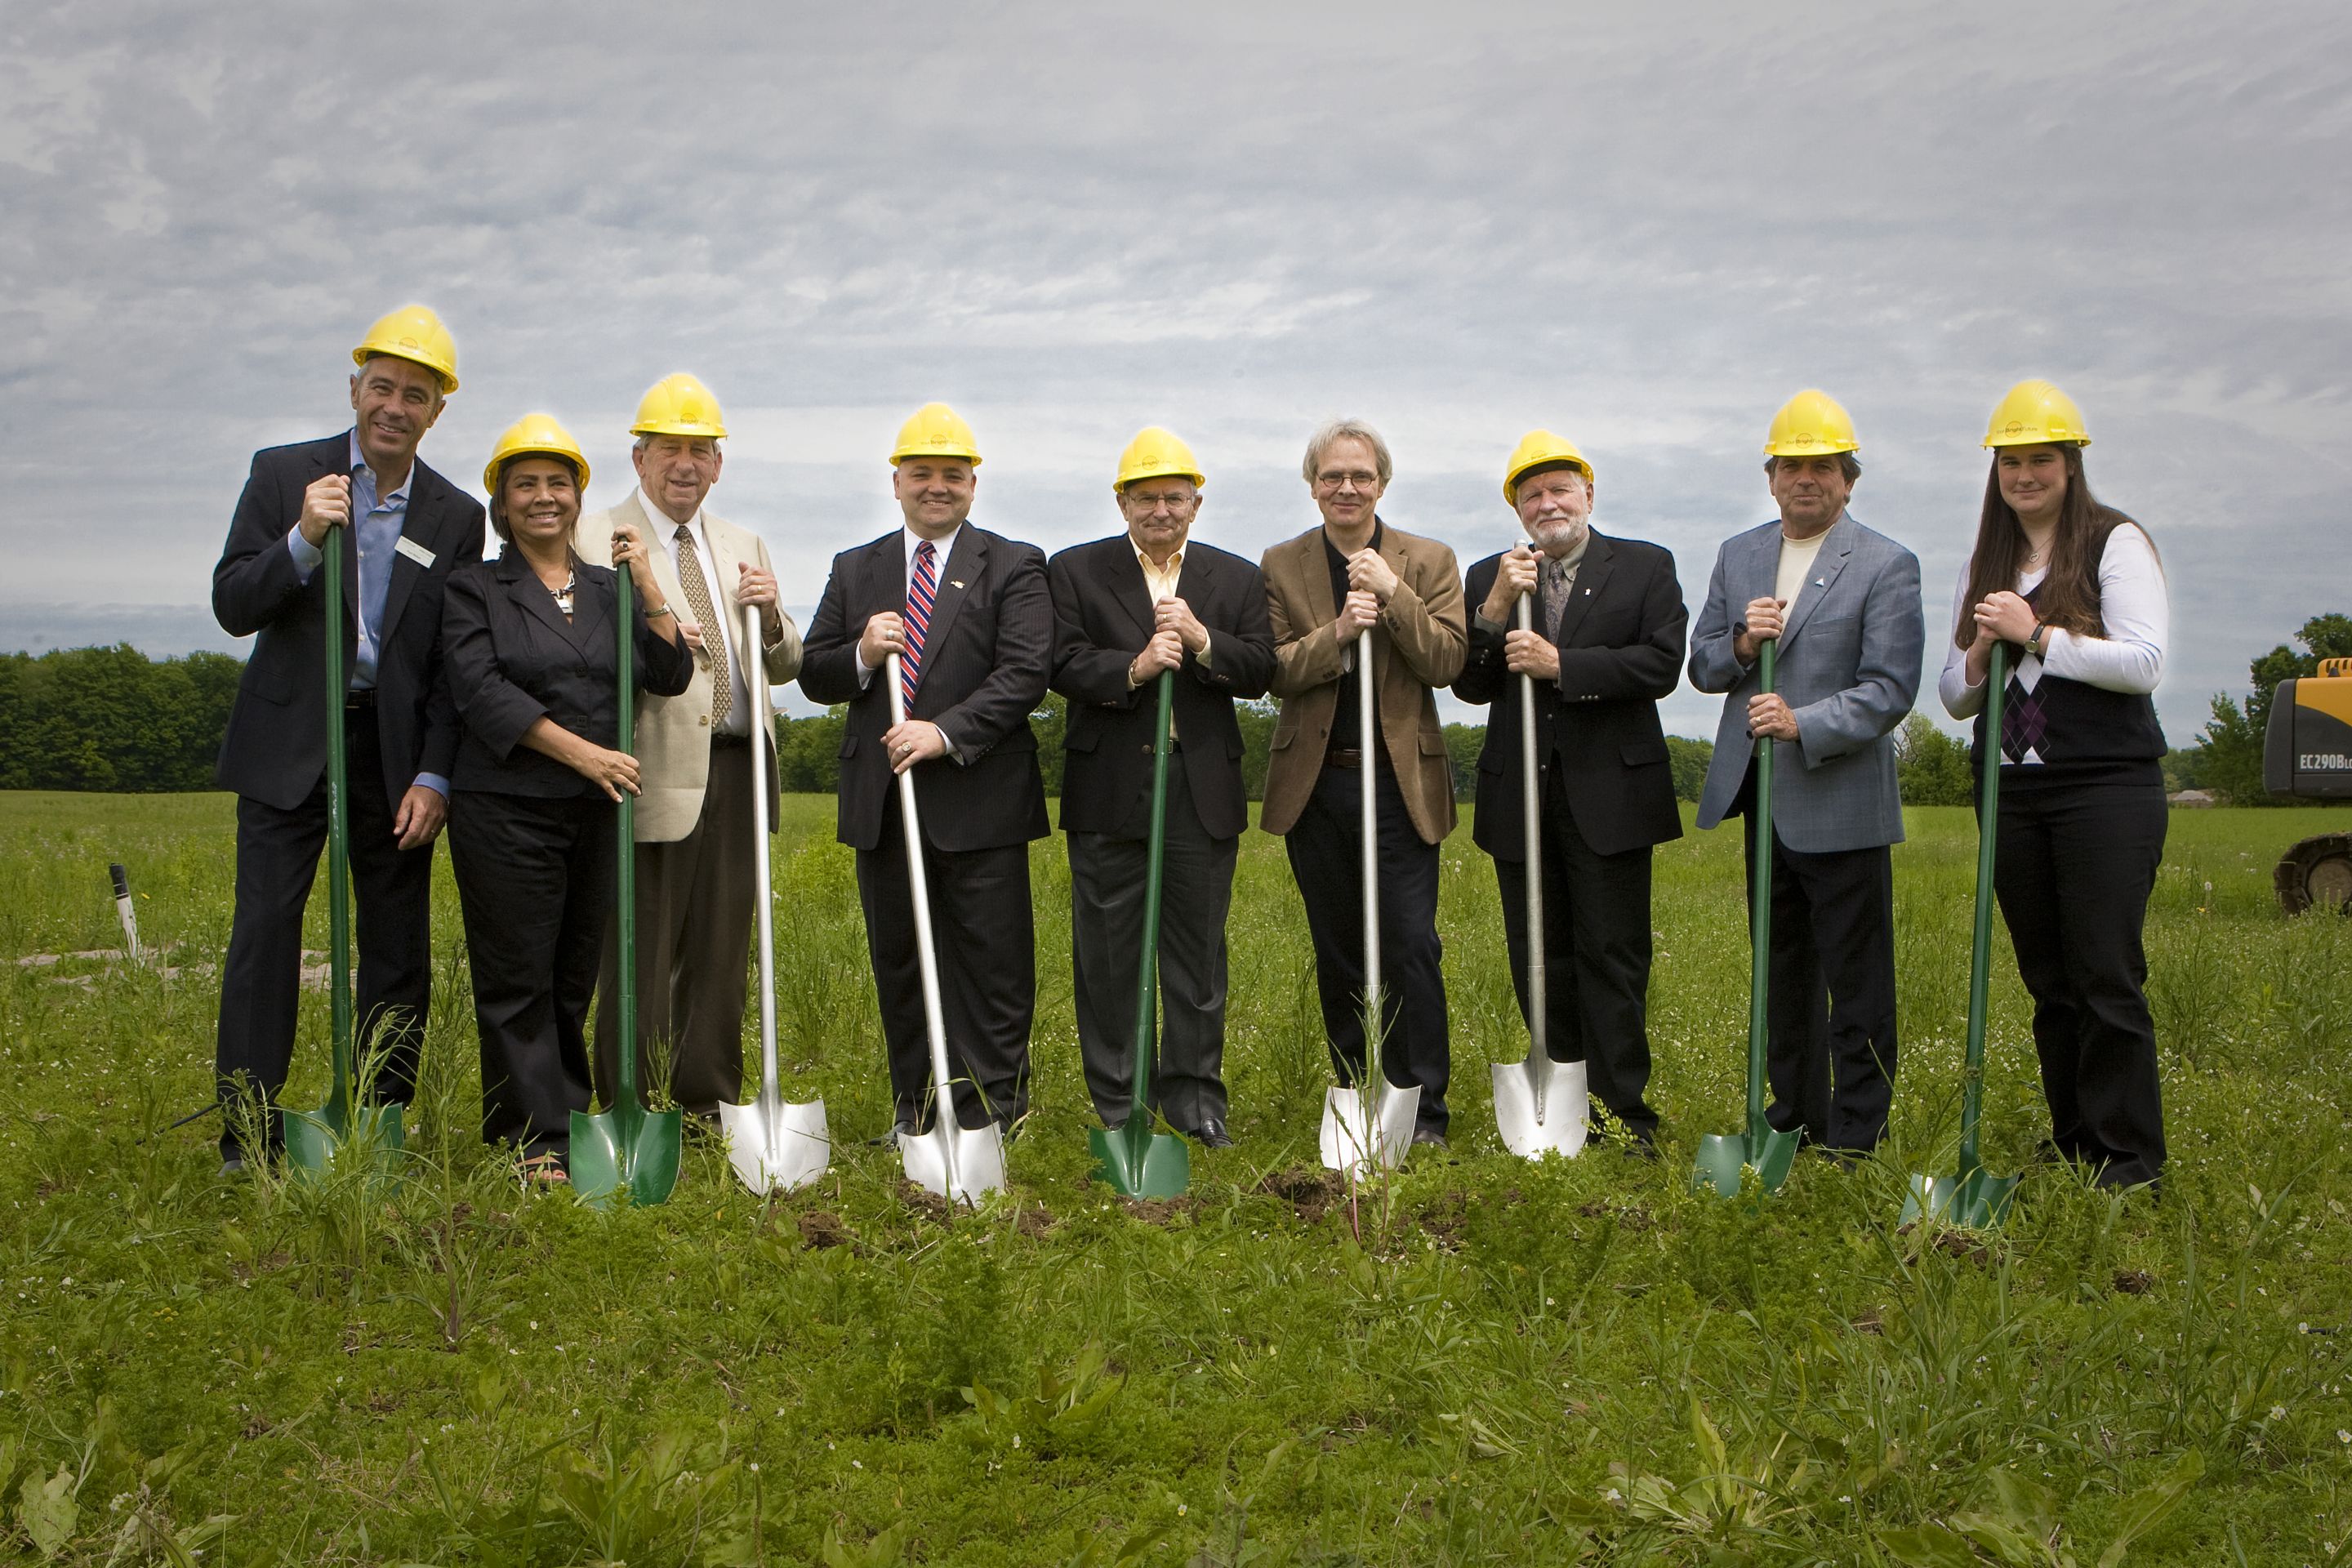 Lakehead University and City of Orillia officials wearing hard hats and holding shovels during 2010 Orillia campus groundbreaking ceremony